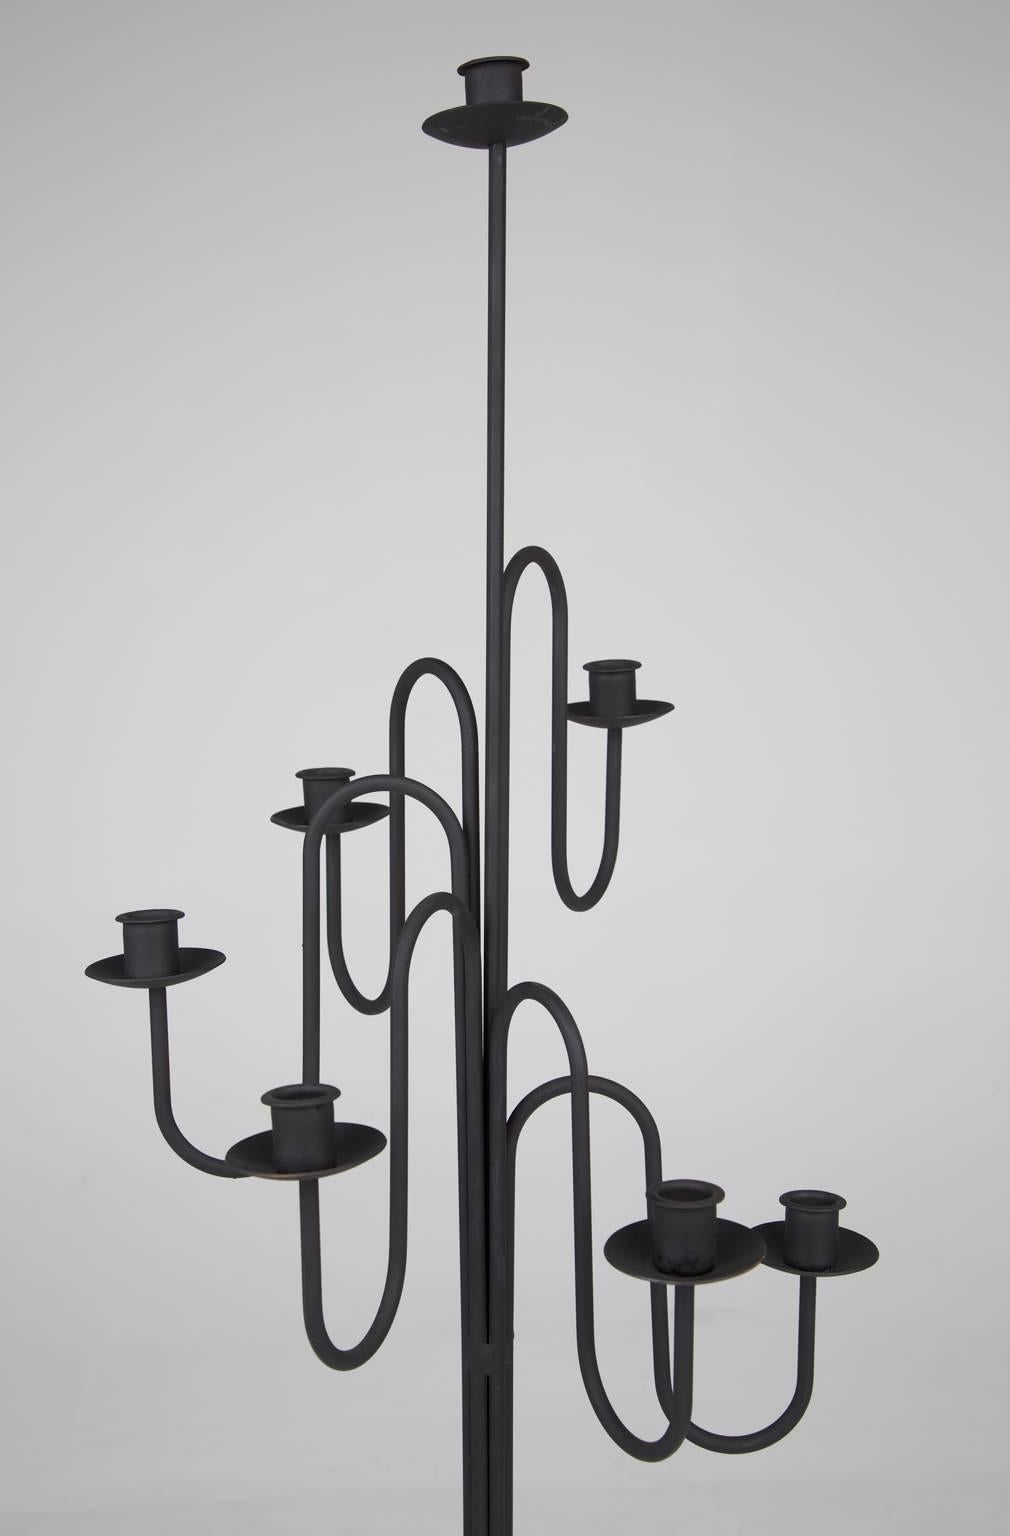 Tall and statuesque Erik Hoglund or Tommi Parzinger style standing candelabra. Fabricated from wrought iron that undulates gracefully to allow for six (6) candles at various heights and one further candle at the pinnacle.

This elegant Stand would